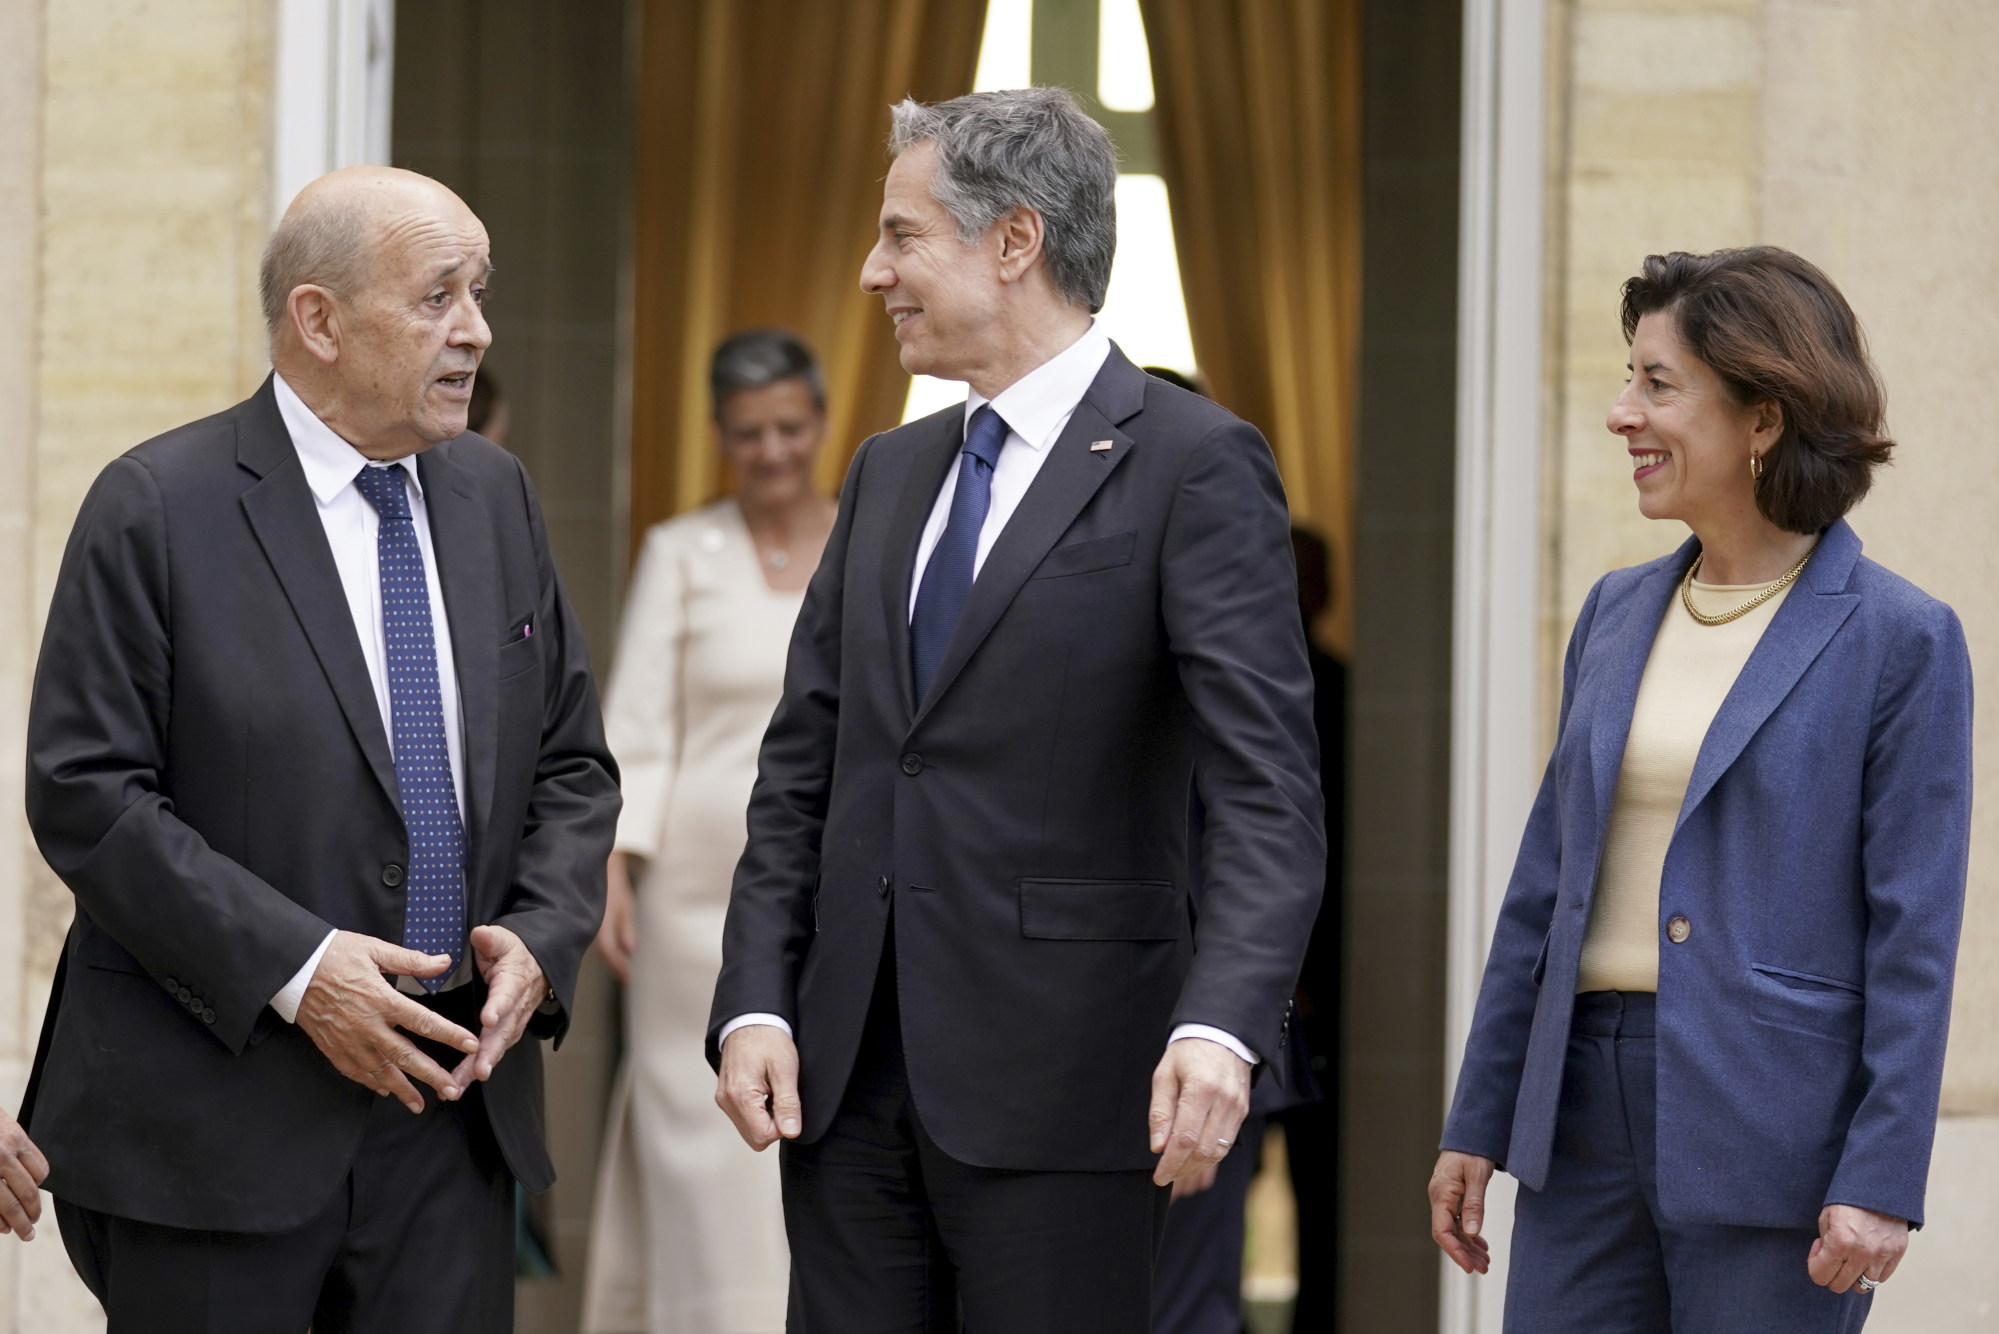 US Secretary of State Antony Blinken (centre) and Commerce Secretary Gina Raimondo speak with French Foreign Minister Jean-Yves Le Drian before Trade and Technology Council talks in Paris on Sunday. Photo: AP